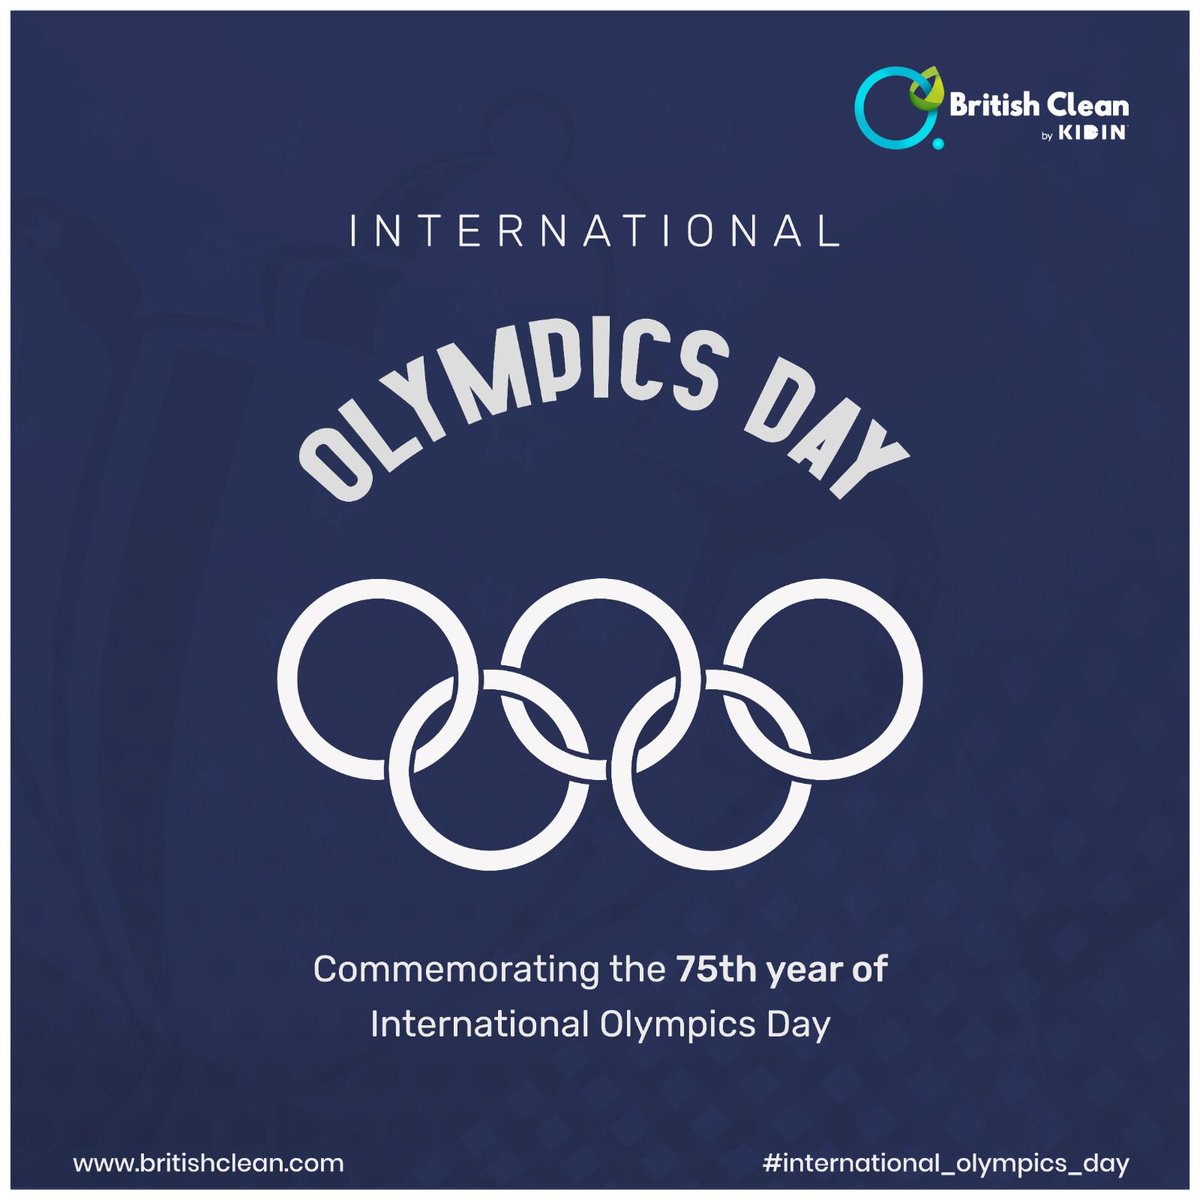 The Olympics were created in honour of ancient Greece’s most famous god, Zeus, king of the gods.

For orders :
Call - 044 28283839
Mail us at - info@britishclean.com

#britishclean #cleaning #clean #dishwash #internationalolympicsday